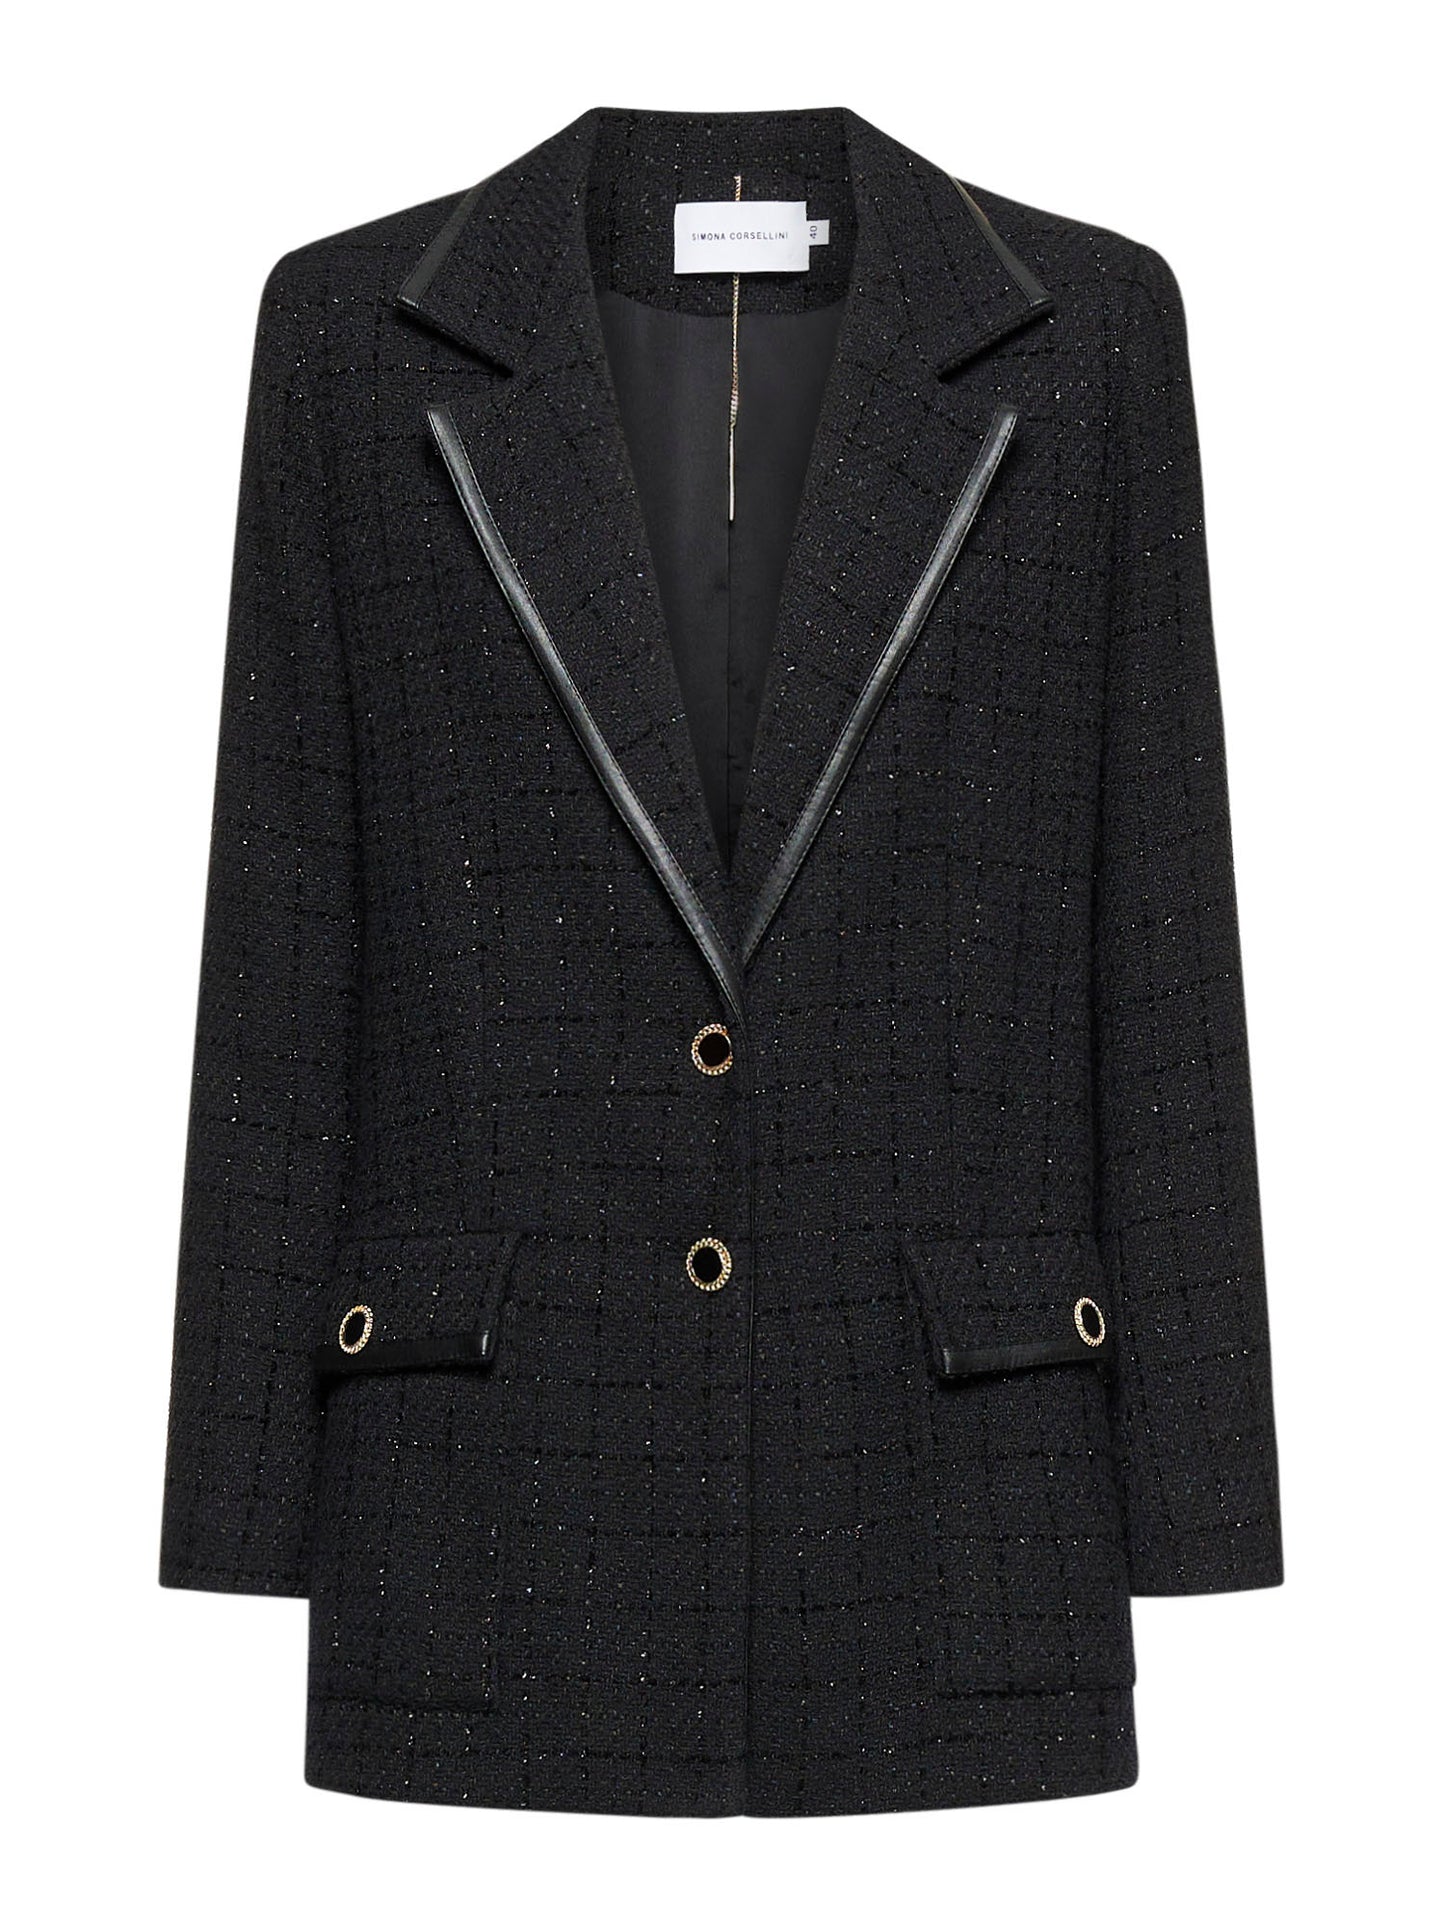 Long jacket in chanel tweed and faux leather piping